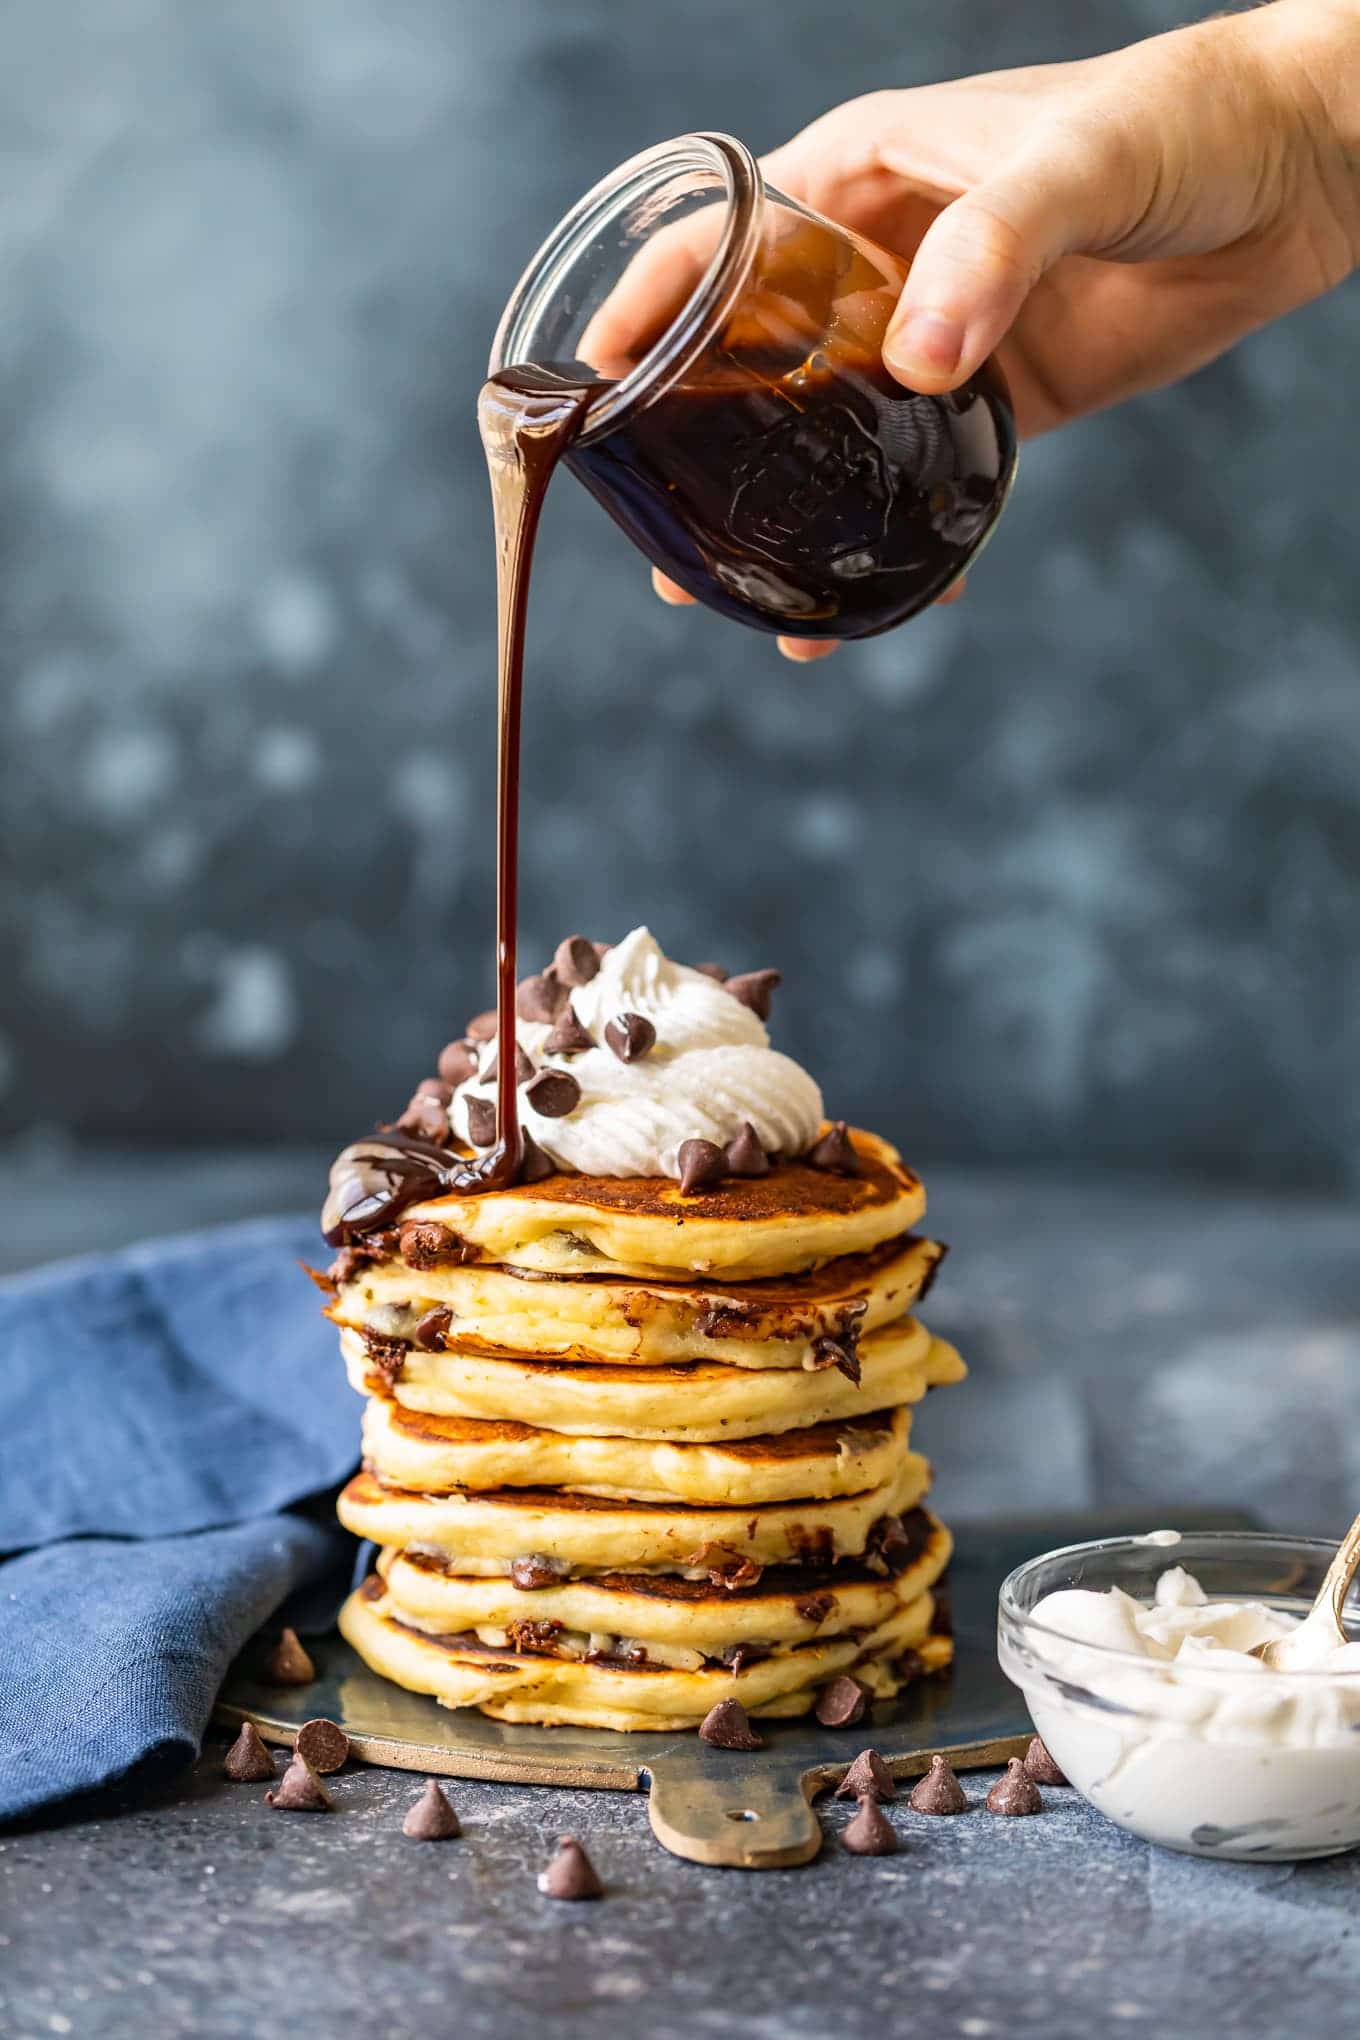 Chocolate syrup being poured over pancakes